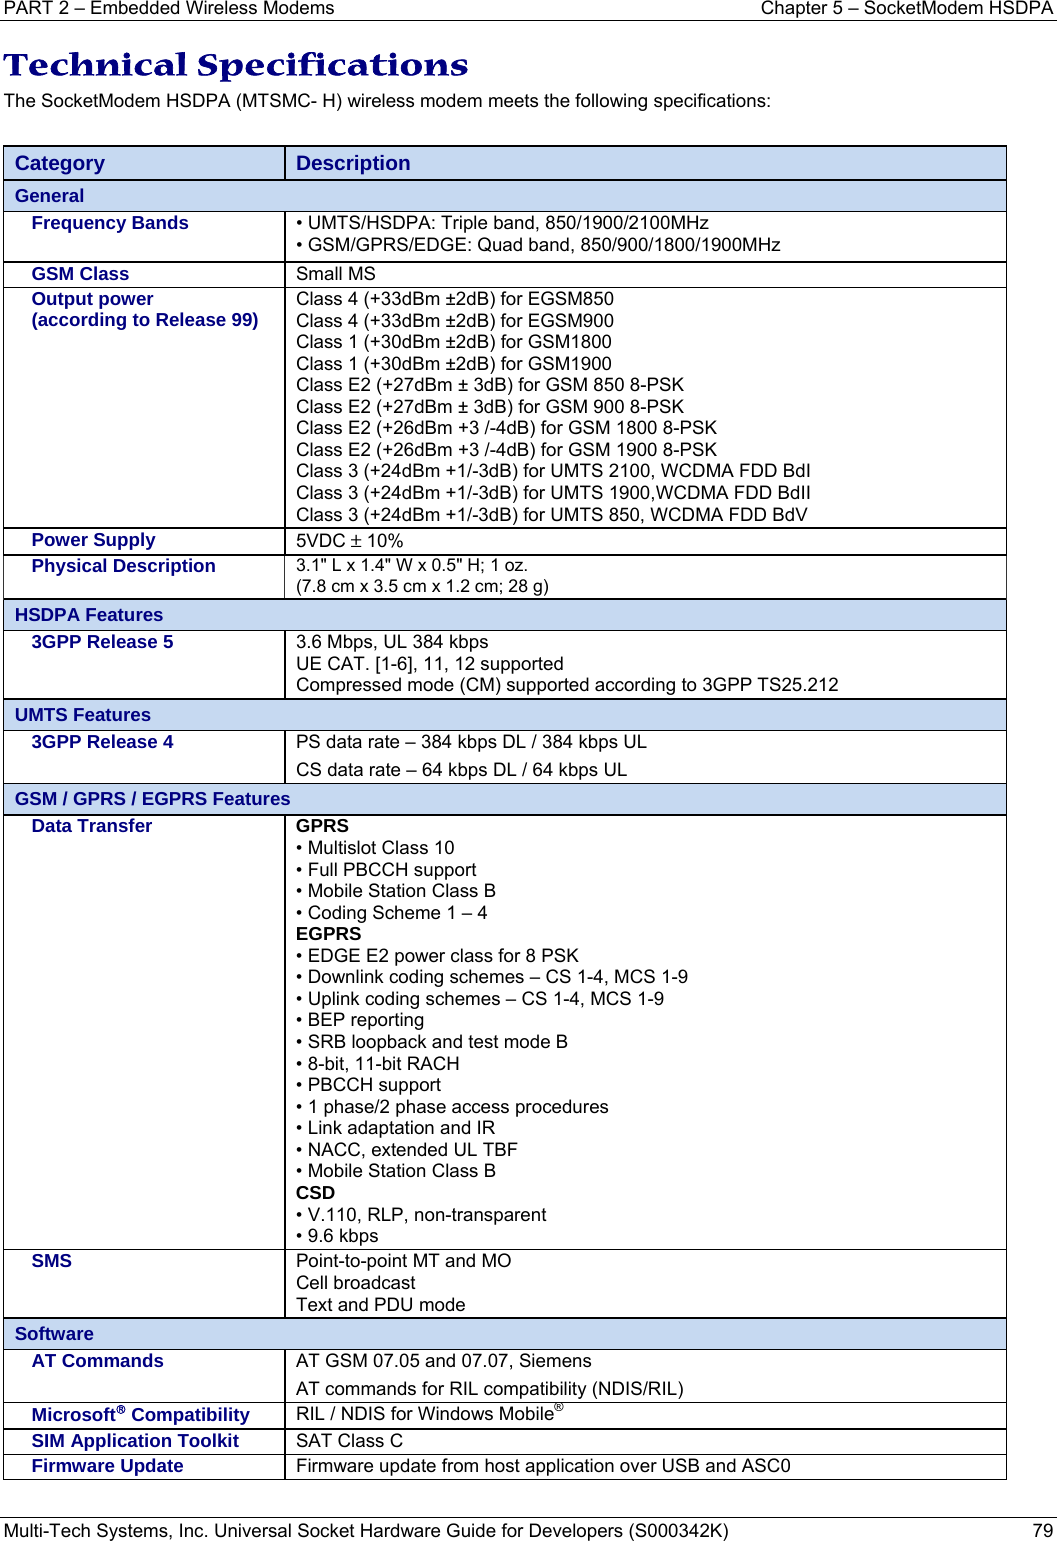 PART 2 – Embedded Wireless Modems  Chapter 5 – SocketModem HSDPA Multi-Tech Systems, Inc. Universal Socket Hardware Guide for Developers (S000342K)  79  Technical Specifications The SocketModem HSDPA (MTSMC- H) wireless modem meets the following specifications:   Category  Description General Frequency Bands   • UMTS/HSDPA: Triple band, 850/1900/2100MHz  • GSM/GPRS/EDGE: Quad band, 850/900/1800/1900MHz  GSM Class   Small MS  Output power  (according to Release 99)   Class 4 (+33dBm ±2dB) for EGSM850  Class 4 (+33dBm ±2dB) for EGSM900  Class 1 (+30dBm ±2dB) for GSM1800  Class 1 (+30dBm ±2dB) for GSM1900  Class E2 (+27dBm ± 3dB) for GSM 850 8-PSK  Class E2 (+27dBm ± 3dB) for GSM 900 8-PSK  Class E2 (+26dBm +3 /-4dB) for GSM 1800 8-PSK  Class E2 (+26dBm +3 /-4dB) for GSM 1900 8-PSK  Class 3 (+24dBm +1/-3dB) for UMTS 2100, WCDMA FDD BdI  Class 3 (+24dBm +1/-3dB) for UMTS 1900,WCDMA FDD BdII  Class 3 (+24dBm +1/-3dB) for UMTS 850, WCDMA FDD BdV  Power Supply   5VDC ± 10%  Physical Description  3.1&quot; L x 1.4&quot; W x 0.5&quot; H; 1 oz. (7.8 cm x 3.5 cm x 1.2 cm; 28 g) HSDPA Features 3GPP Release 5  3.6 Mbps, UL 384 kbps UE CAT. [1-6], 11, 12 supported Compressed mode (CM) supported according to 3GPP TS25.212 UMTS Features 3GPP Release 4  PS data rate – 384 kbps DL / 384 kbps UL CS data rate – 64 kbps DL / 64 kbps UL GSM / GPRS / EGPRS Features Data Transfer GPRS • Multislot Class 10  • Full PBCCH support  • Mobile Station Class B  • Coding Scheme 1 – 4  EGPRS  • EDGE E2 power class for 8 PSK  • Downlink coding schemes – CS 1-4, MCS 1-9  • Uplink coding schemes – CS 1-4, MCS 1-9  • BEP reporting  • SRB loopback and test mode B  • 8-bit, 11-bit RACH  • PBCCH support  • 1 phase/2 phase access procedures  • Link adaptation and IR  • NACC, extended UL TBF  • Mobile Station Class B  CSD  • V.110, RLP, non-transparent  • 9.6 kbps  SMS  Point-to-point MT and MO Cell broadcast Text and PDU mode Software AT Commands  AT GSM 07.05 and 07.07, Siemens AT commands for RIL compatibility (NDIS/RIL) Microsoft® Compatibility  RIL / NDIS for Windows Mobile® SIM Application Toolkit  SAT Class C Firmware Update  Firmware update from host application over USB and ASC0  